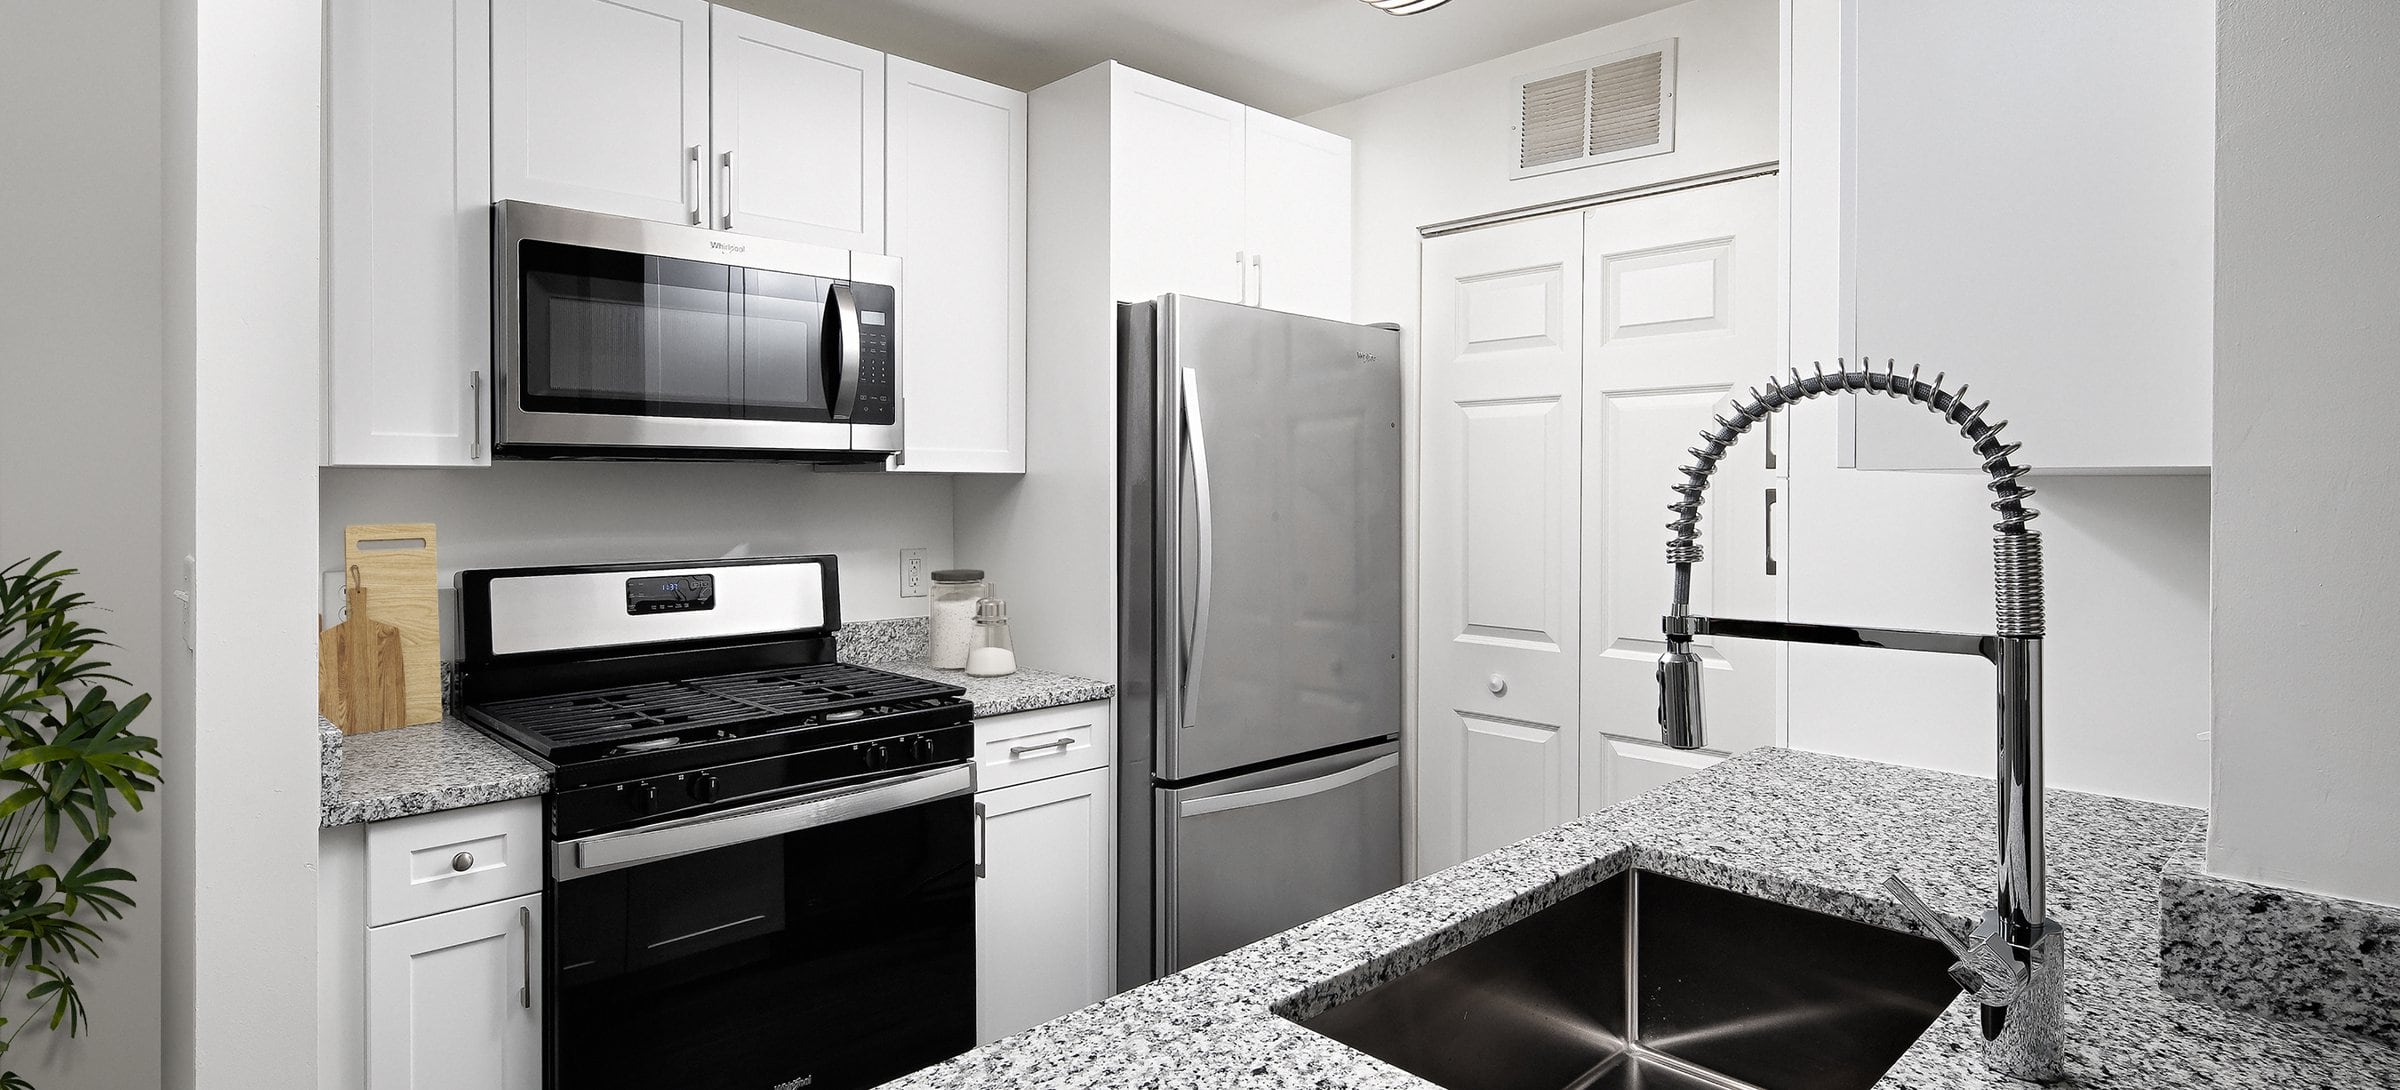 Phase I Renovated apartment kitchen with white cabinetry, quartz countertops, and stainless steel appliances